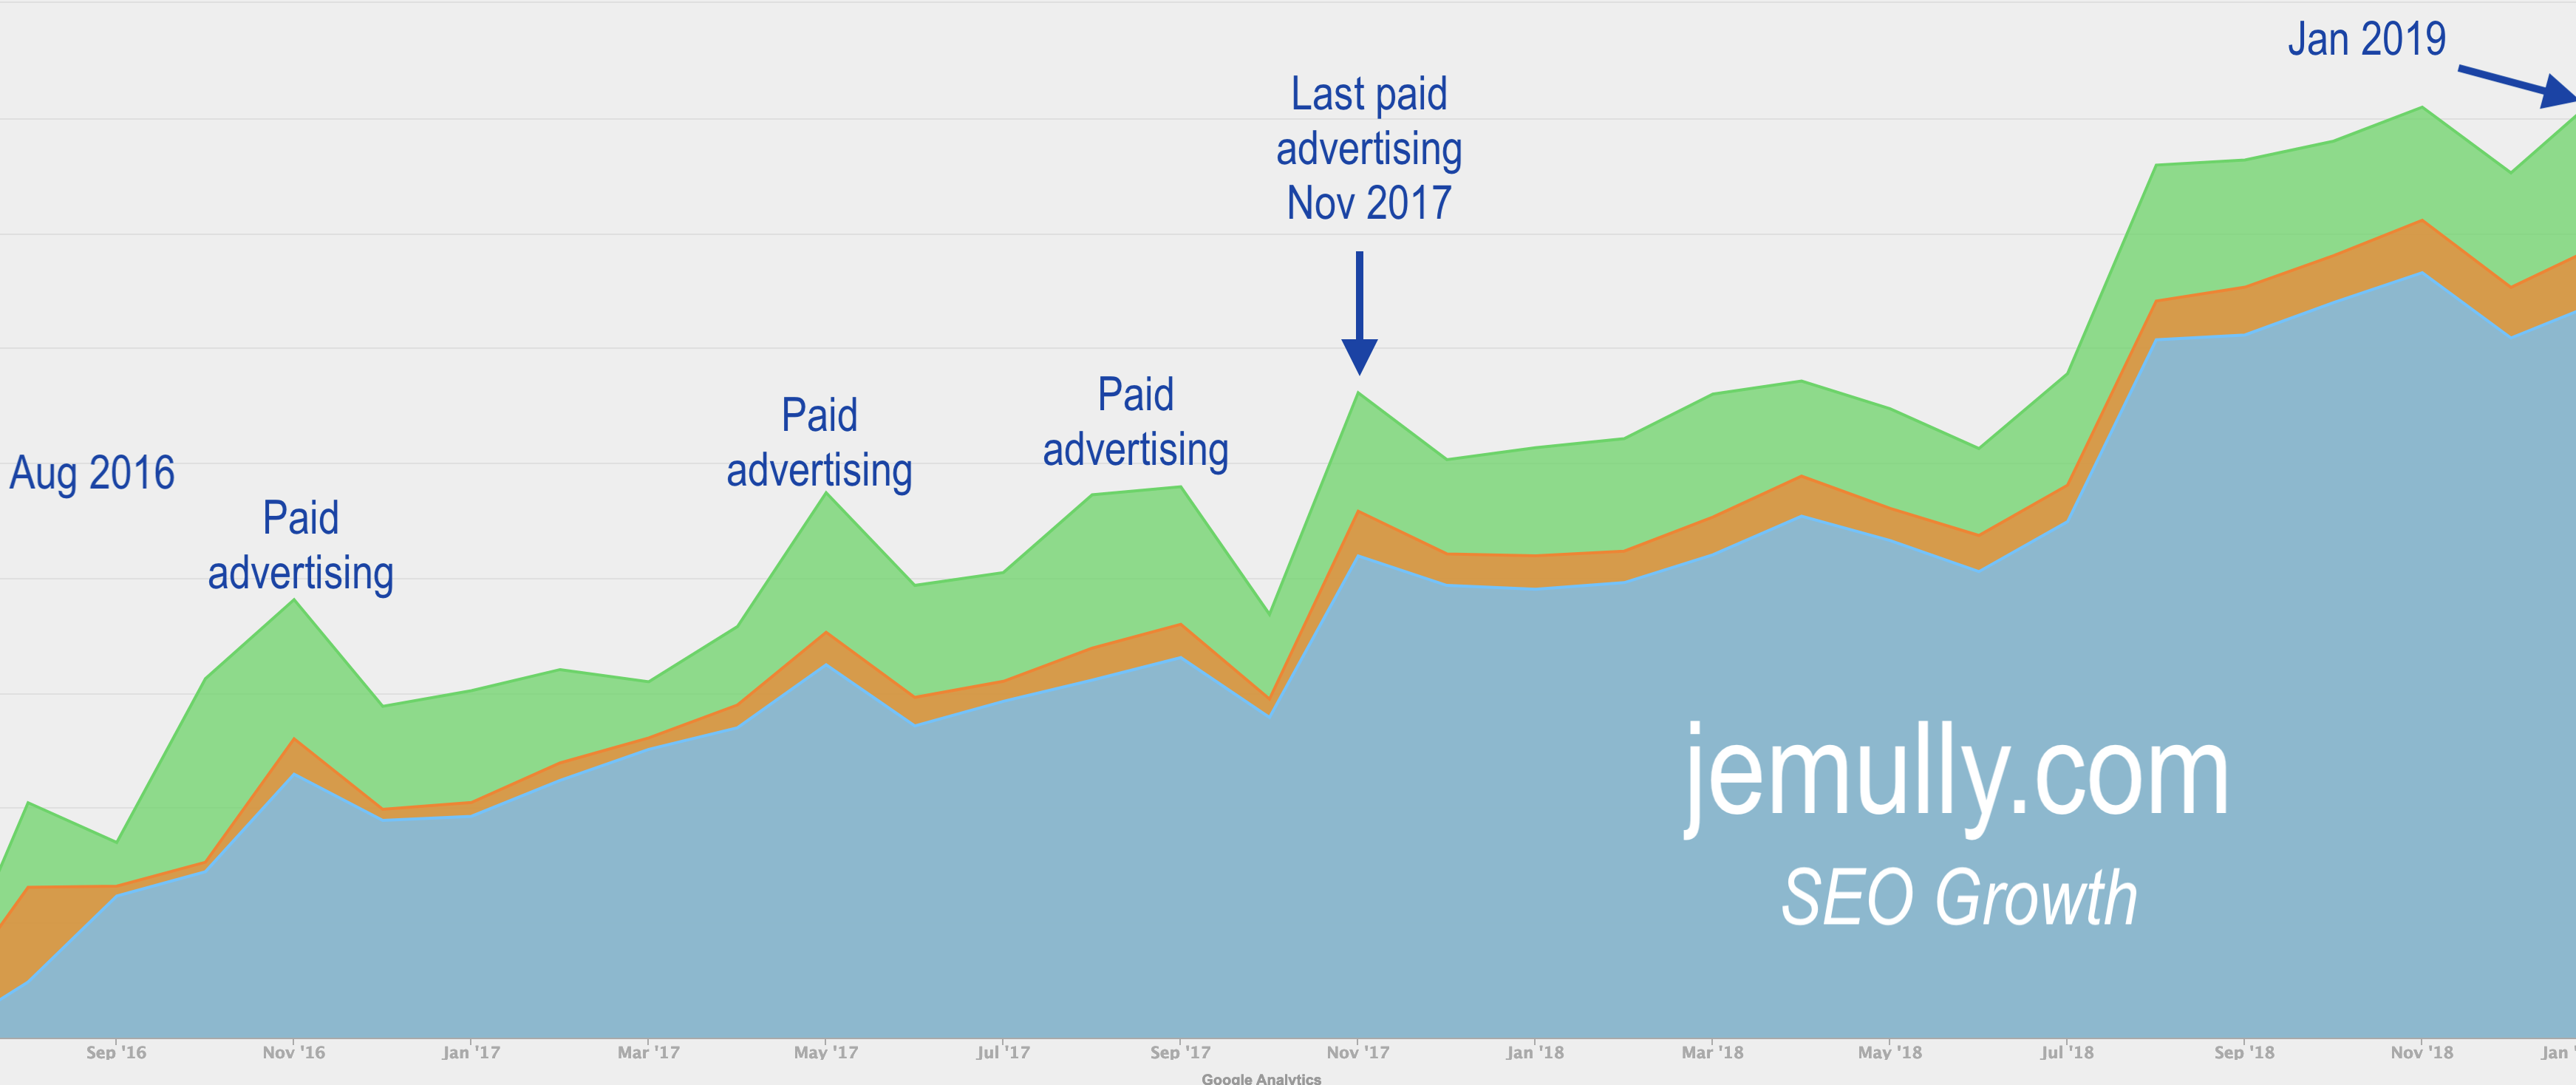 Jemully invested in content marketing for long term SEO growth